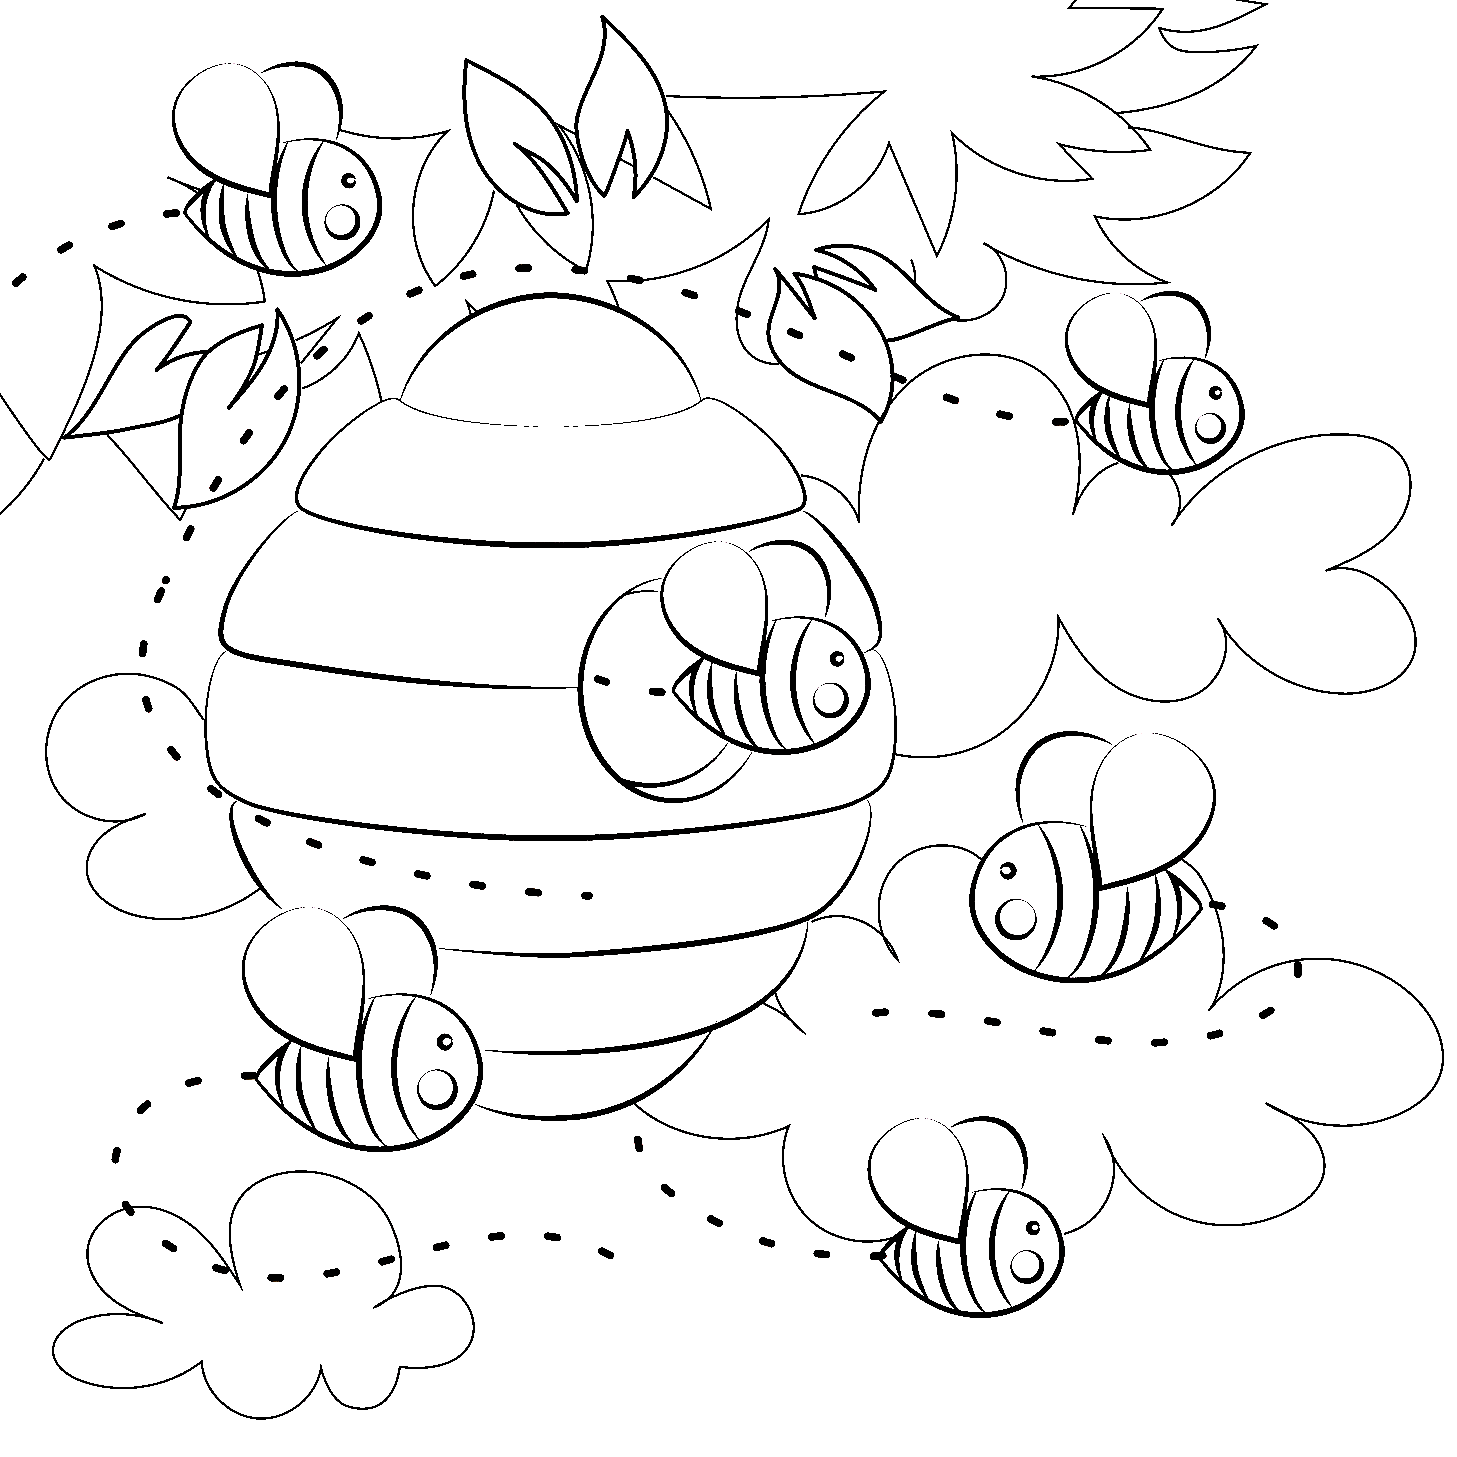 Bees with Beehive Coloring Page